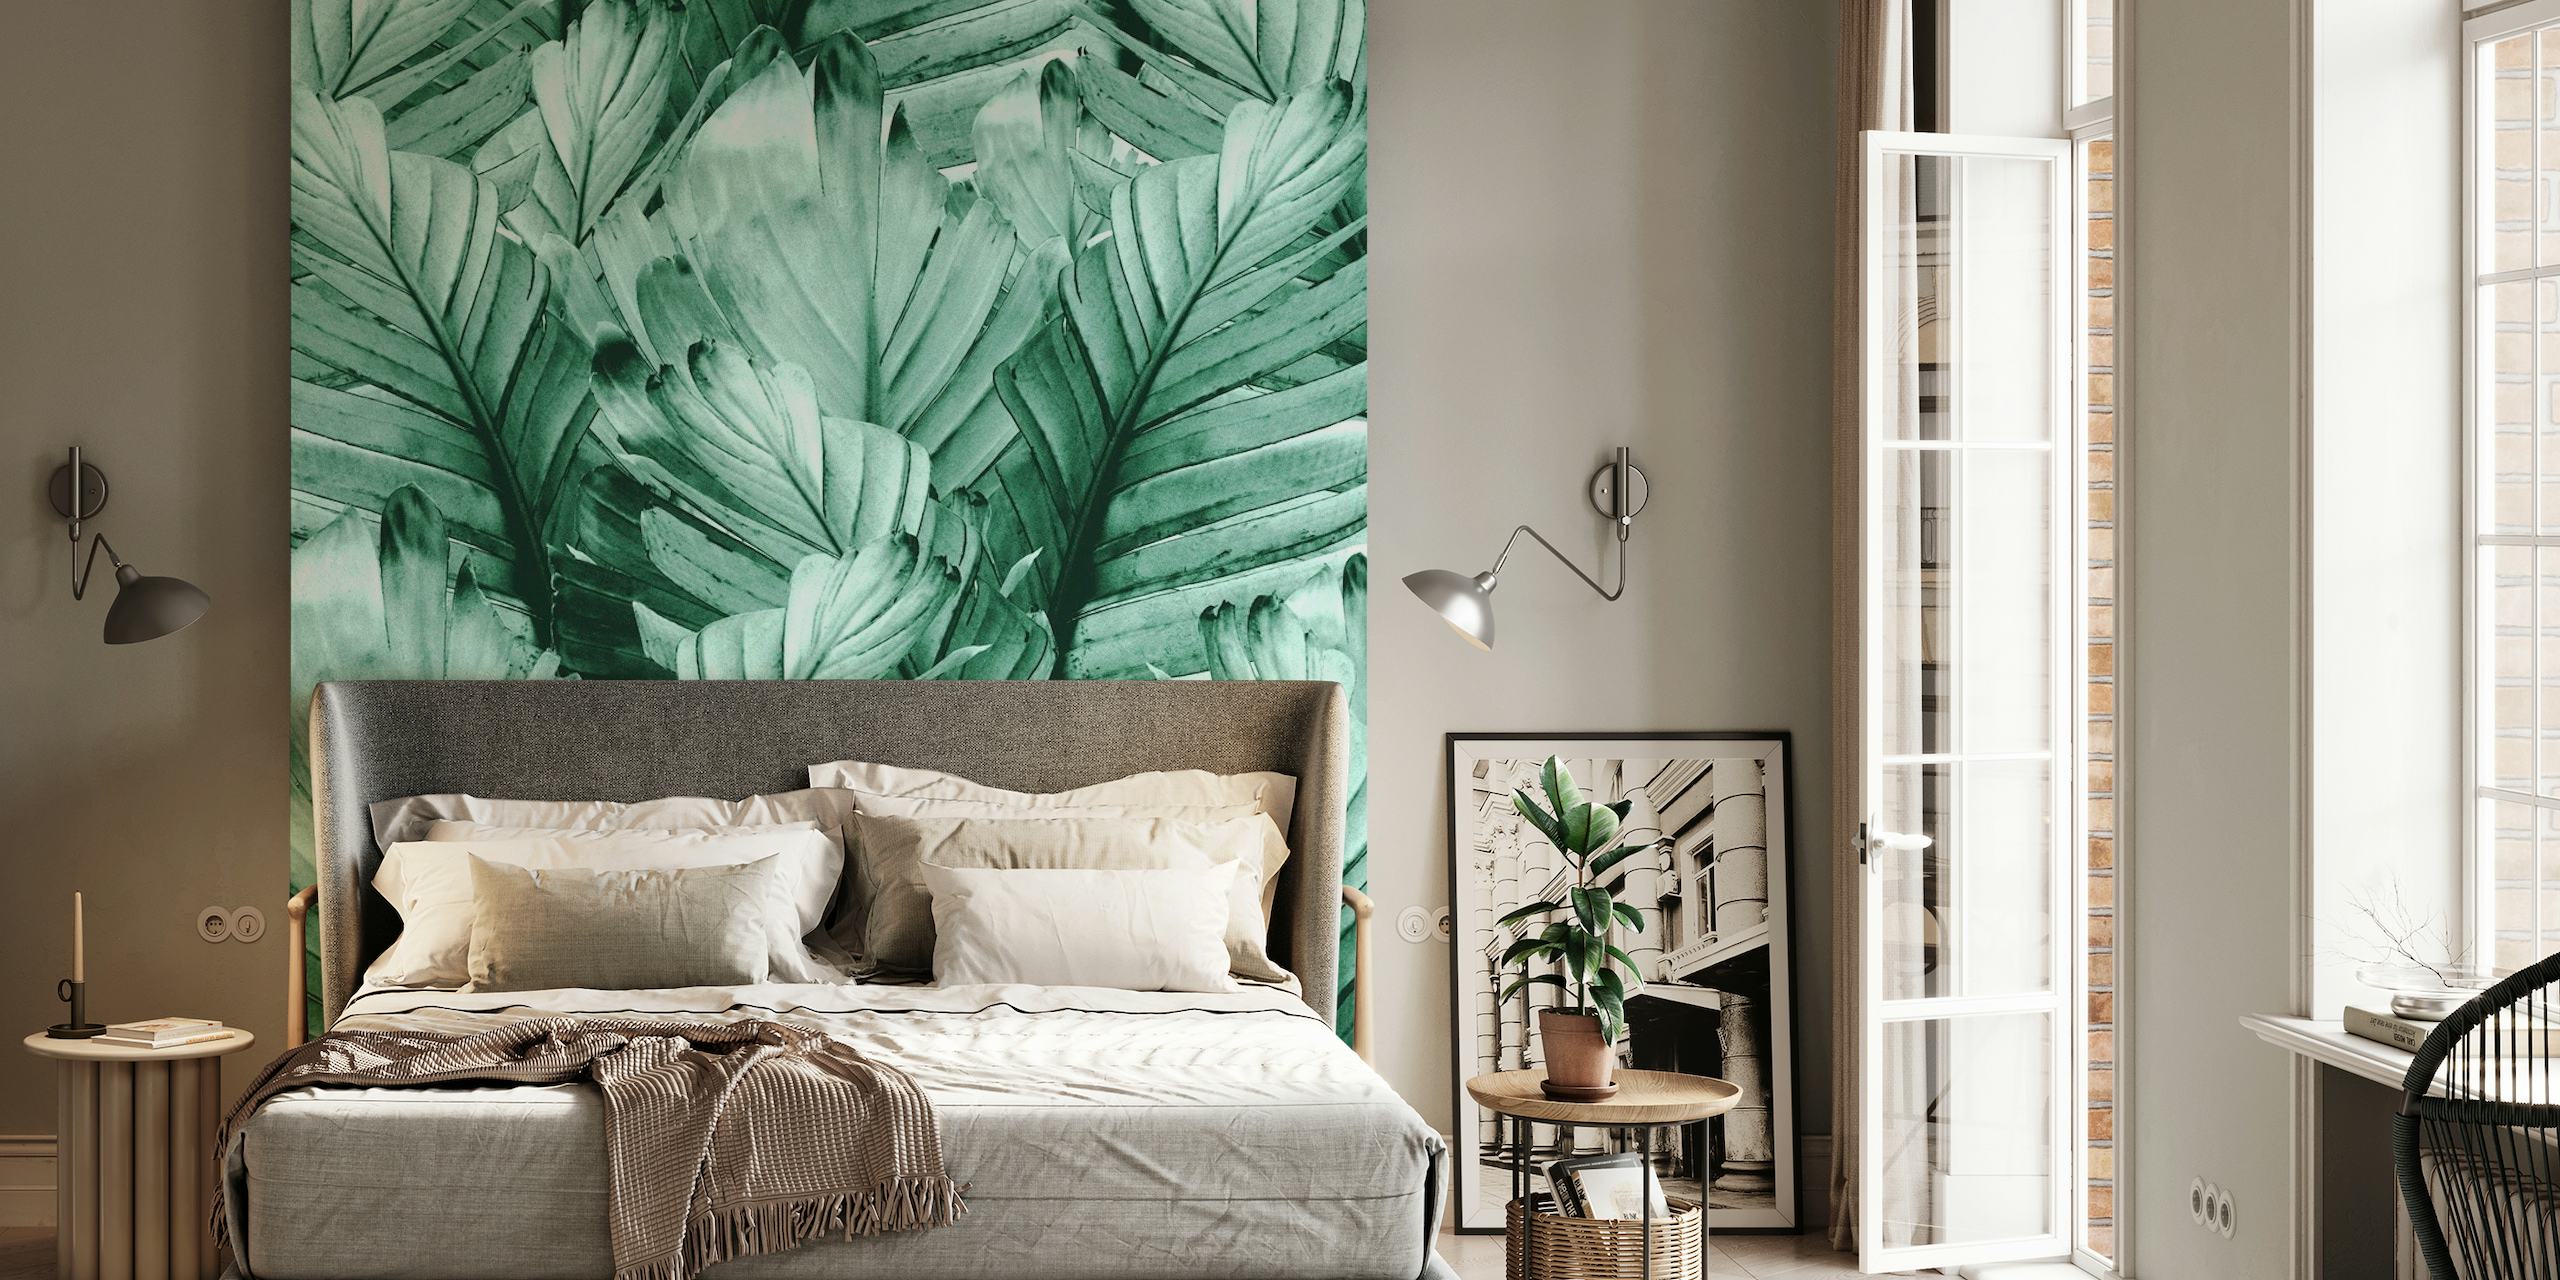 Green banana leaves wall mural with detailed textures in a tropical style